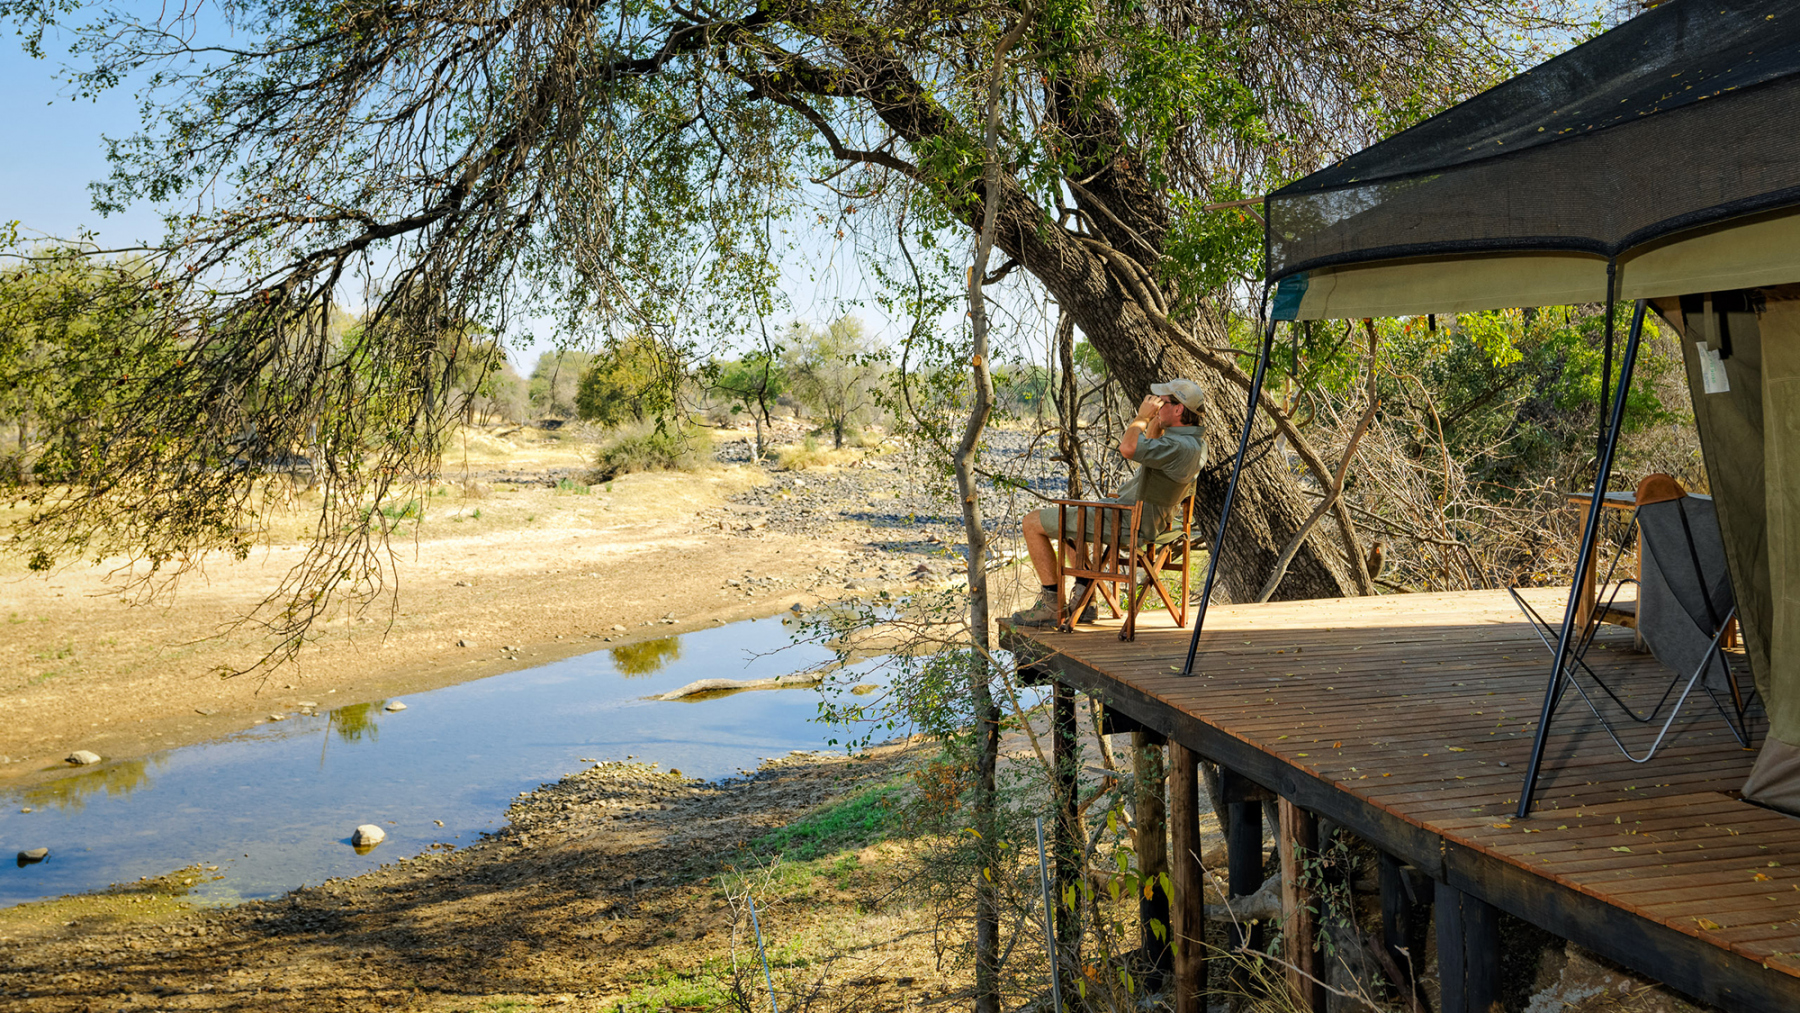 Central Tuli in Eastern Botswana awarded as 'Best of The World Destination  for 2023' by National Geographic Traveler - Stichting Timbo Afrika